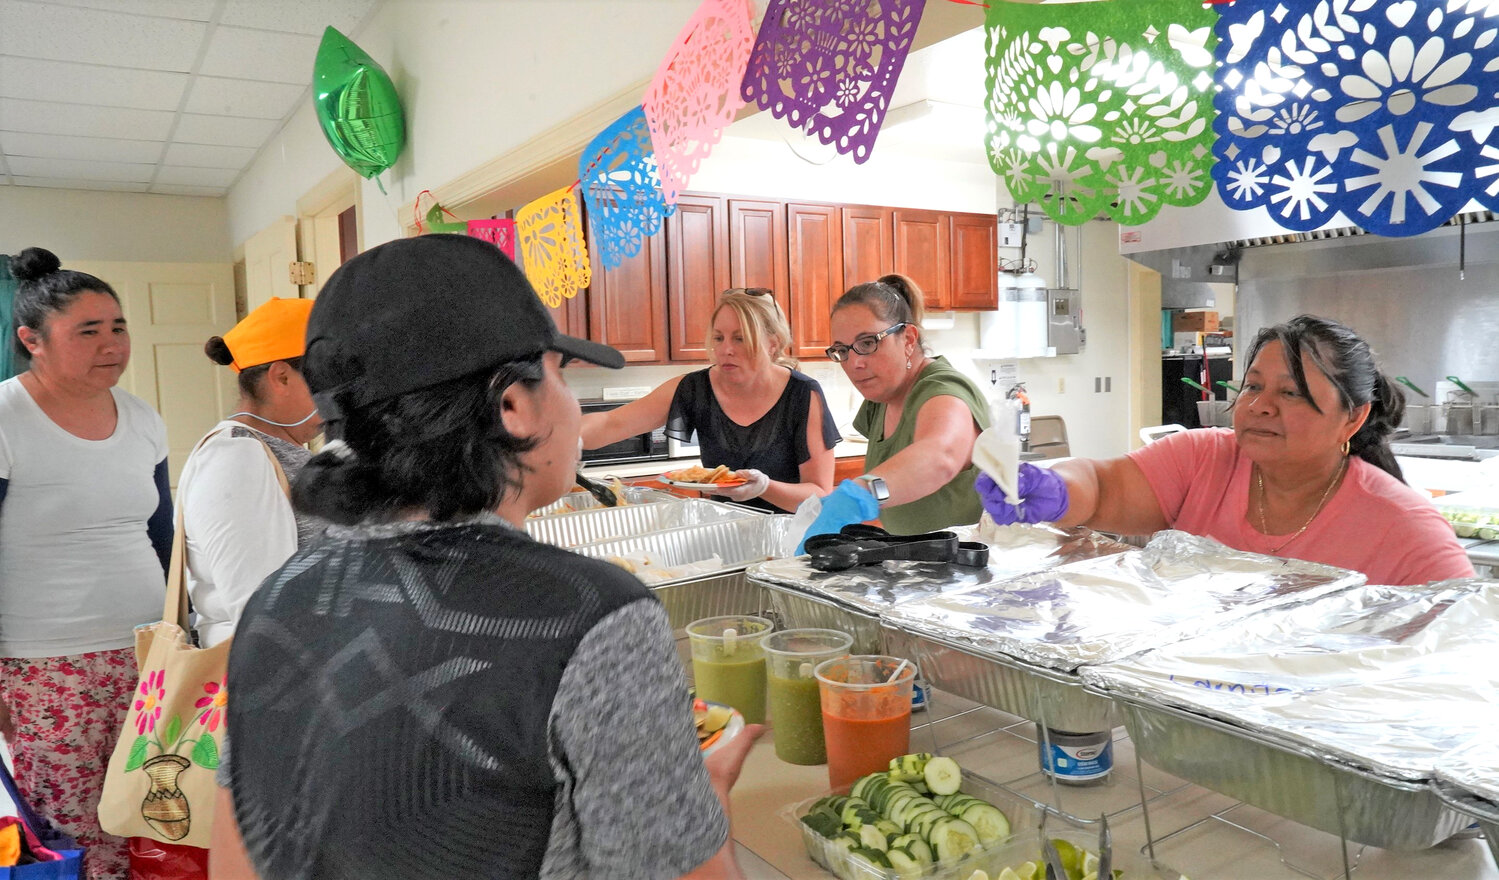 Volunteers, Amanda Priestley and Claudia Stecher served a meal from Taqueria Floritas at the event.